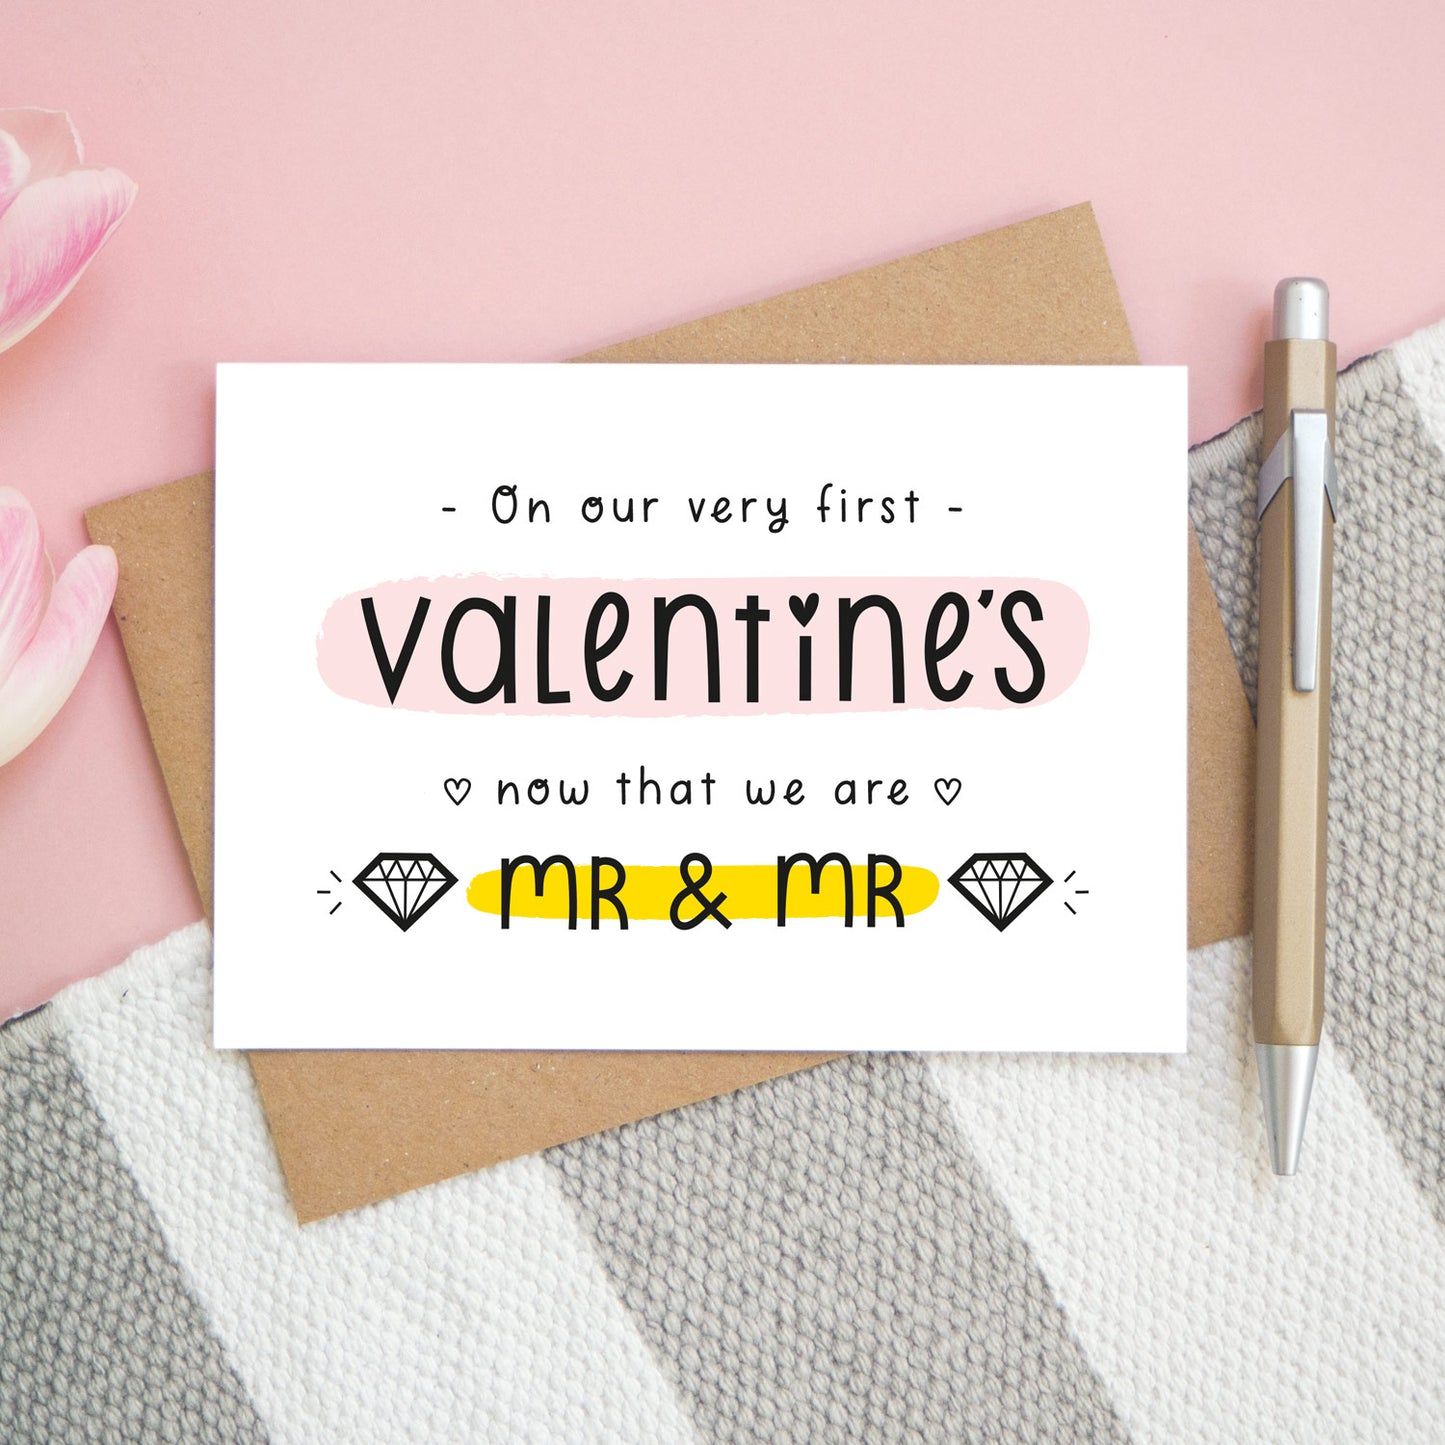 A first anniversary or Valentine’s card photographed on a pink background with pink tulip flowers, a gold pen and a grey and white stripe rug. This image shows the first valentine’s option with the Mr & Mr wording. The text is black and there are pops of yellow and pink behind key words.